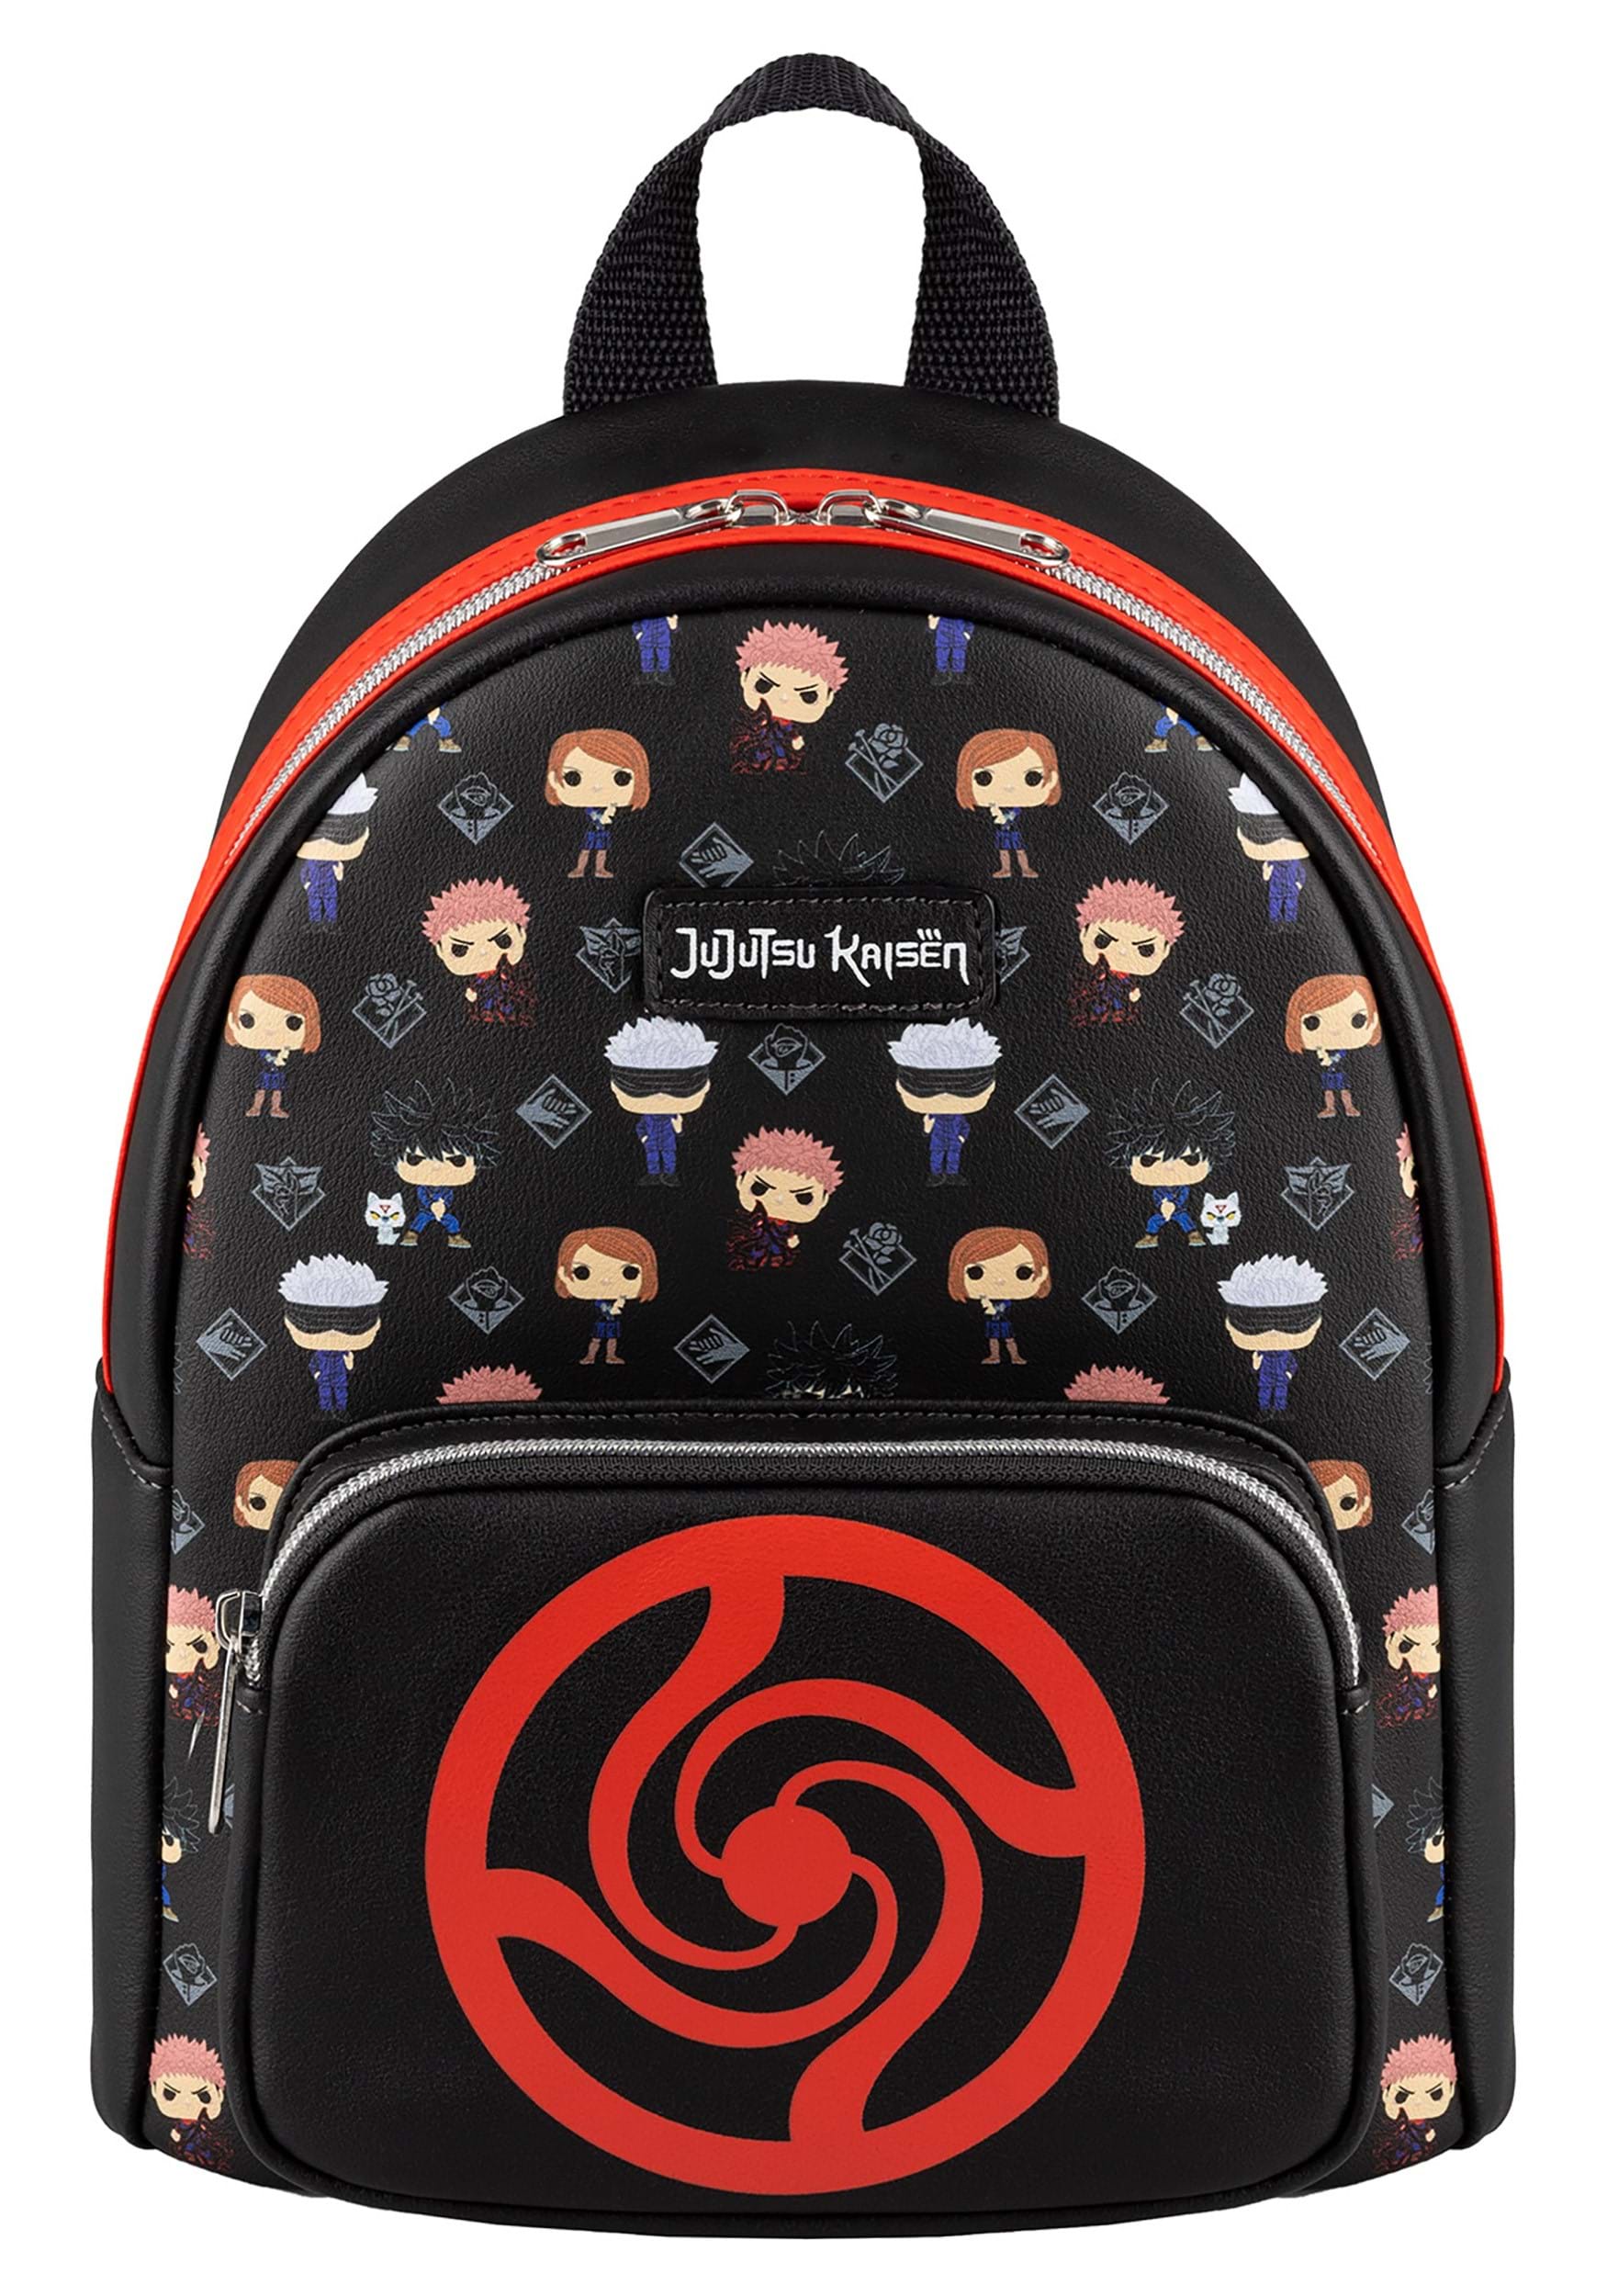 Lowkey Anime Backpacks for Sale | Redbubble